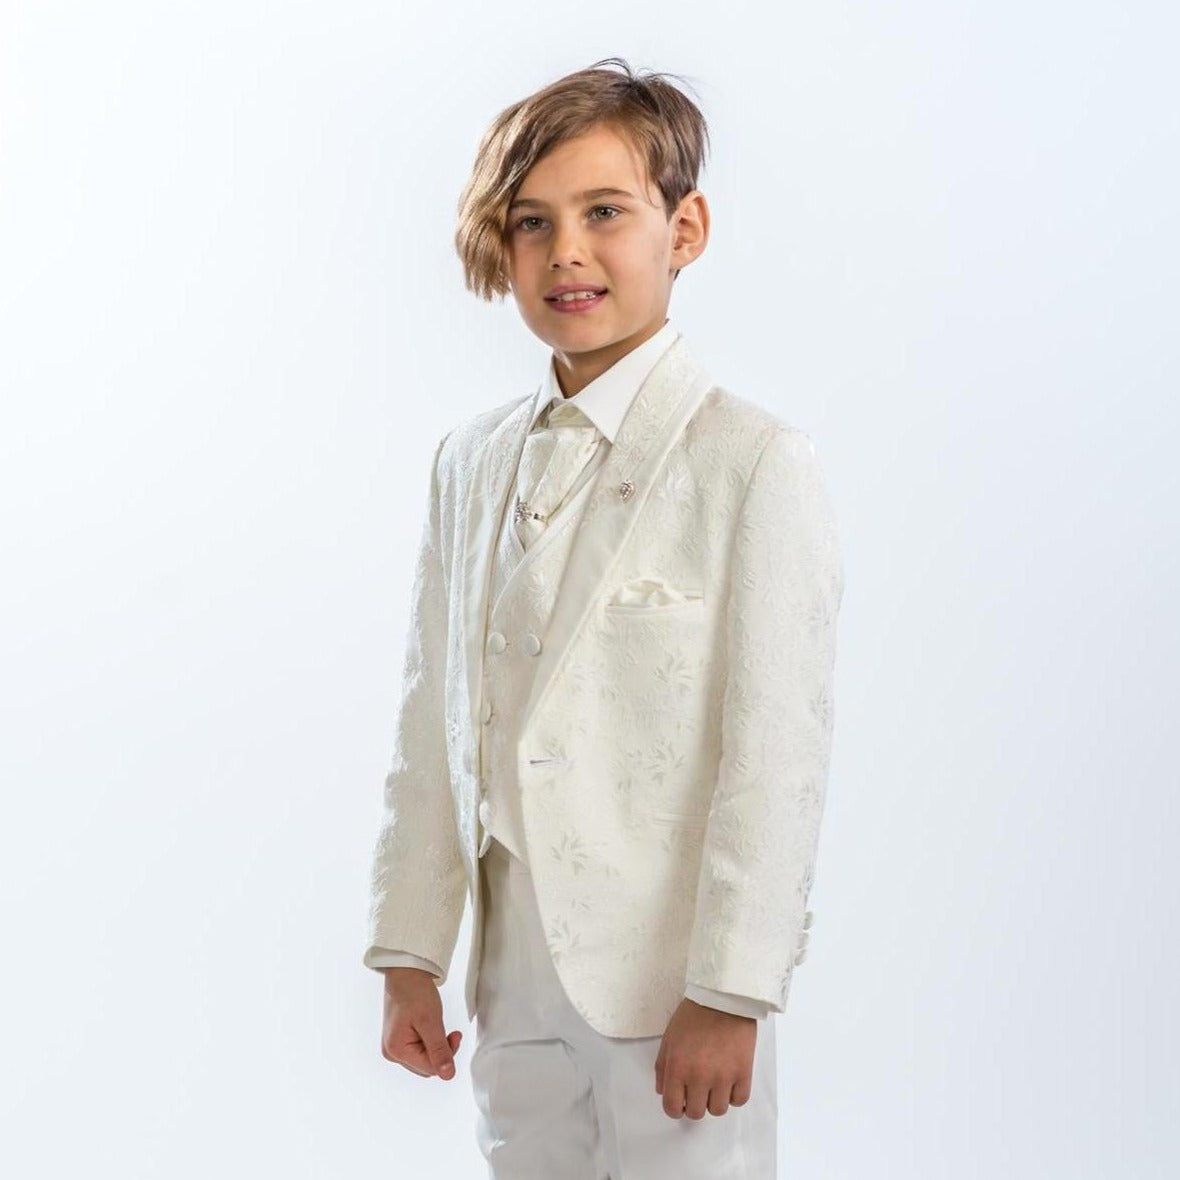 Lord Alfred Formal Boys Suit